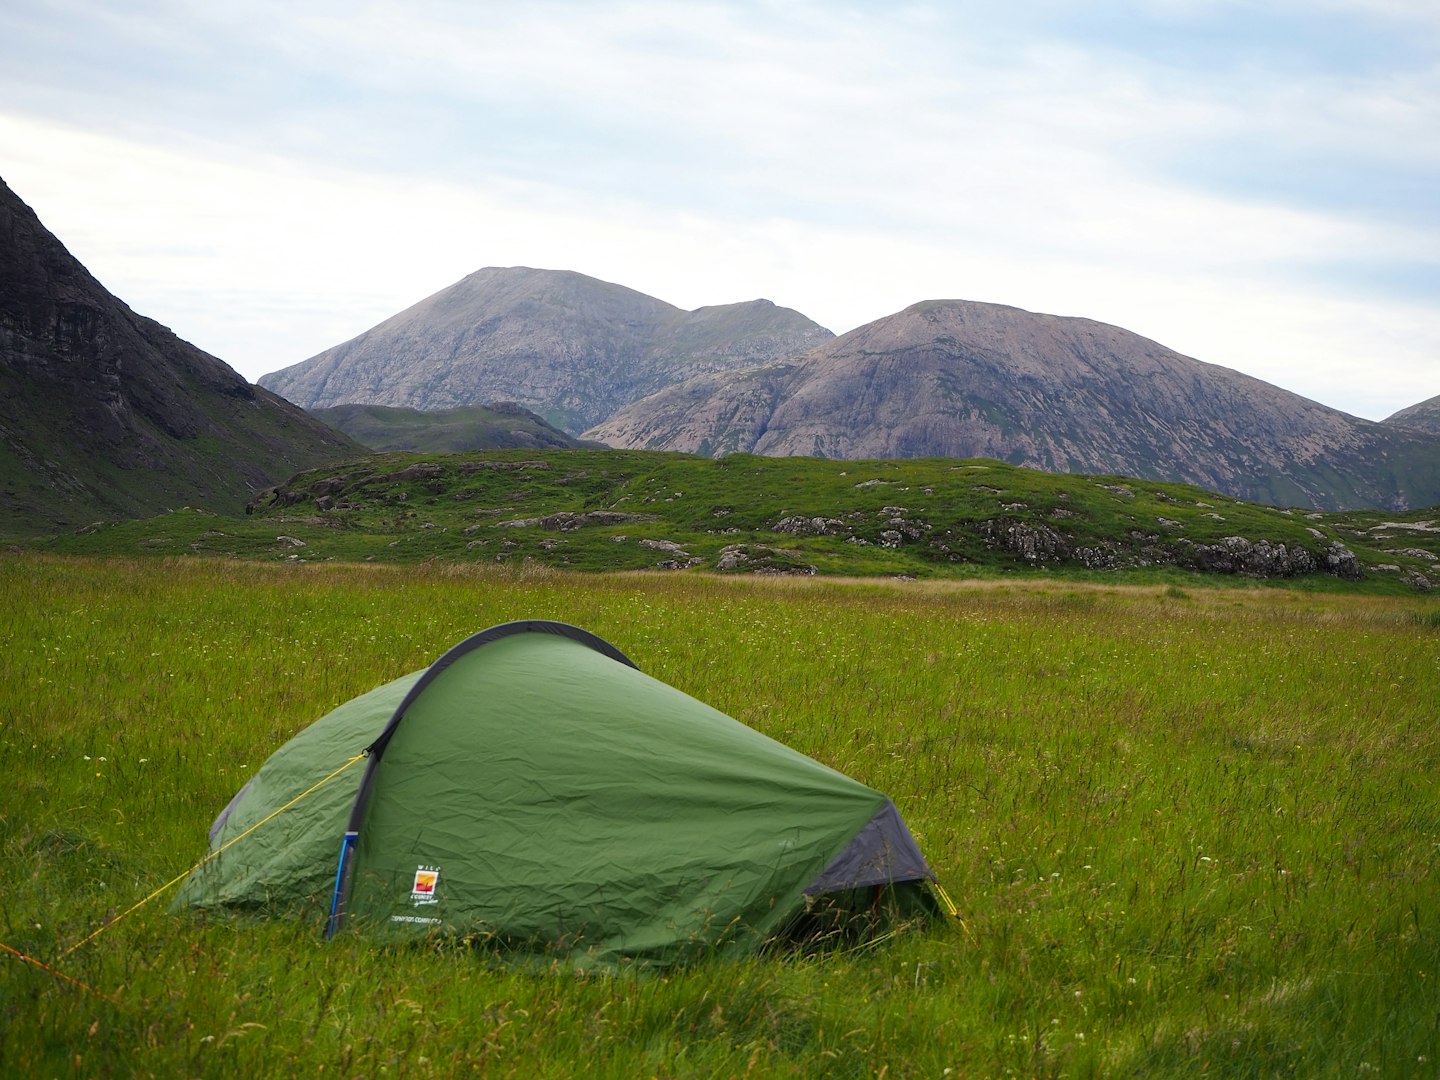 Wild Country Zephyros Compact 2 pitched in a valley